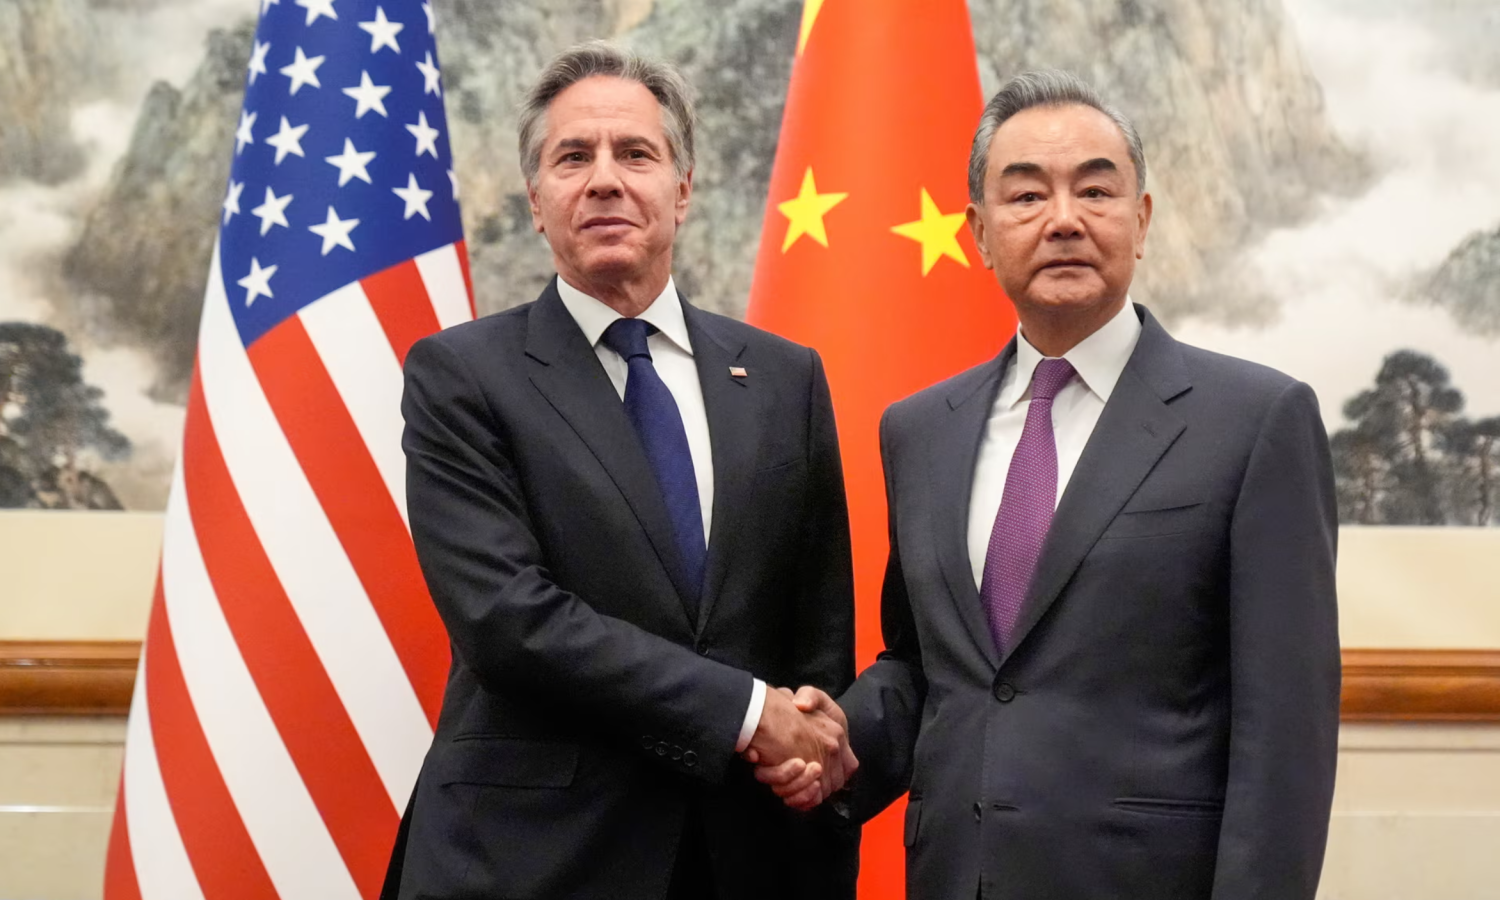 The US secretary of state, Antony Blinken (left) meets China's foreign minister, Wang Yi, at the Diaoyutai state guesthouse in Beijing. Photograph: Mark Schiefelbein/Reuters